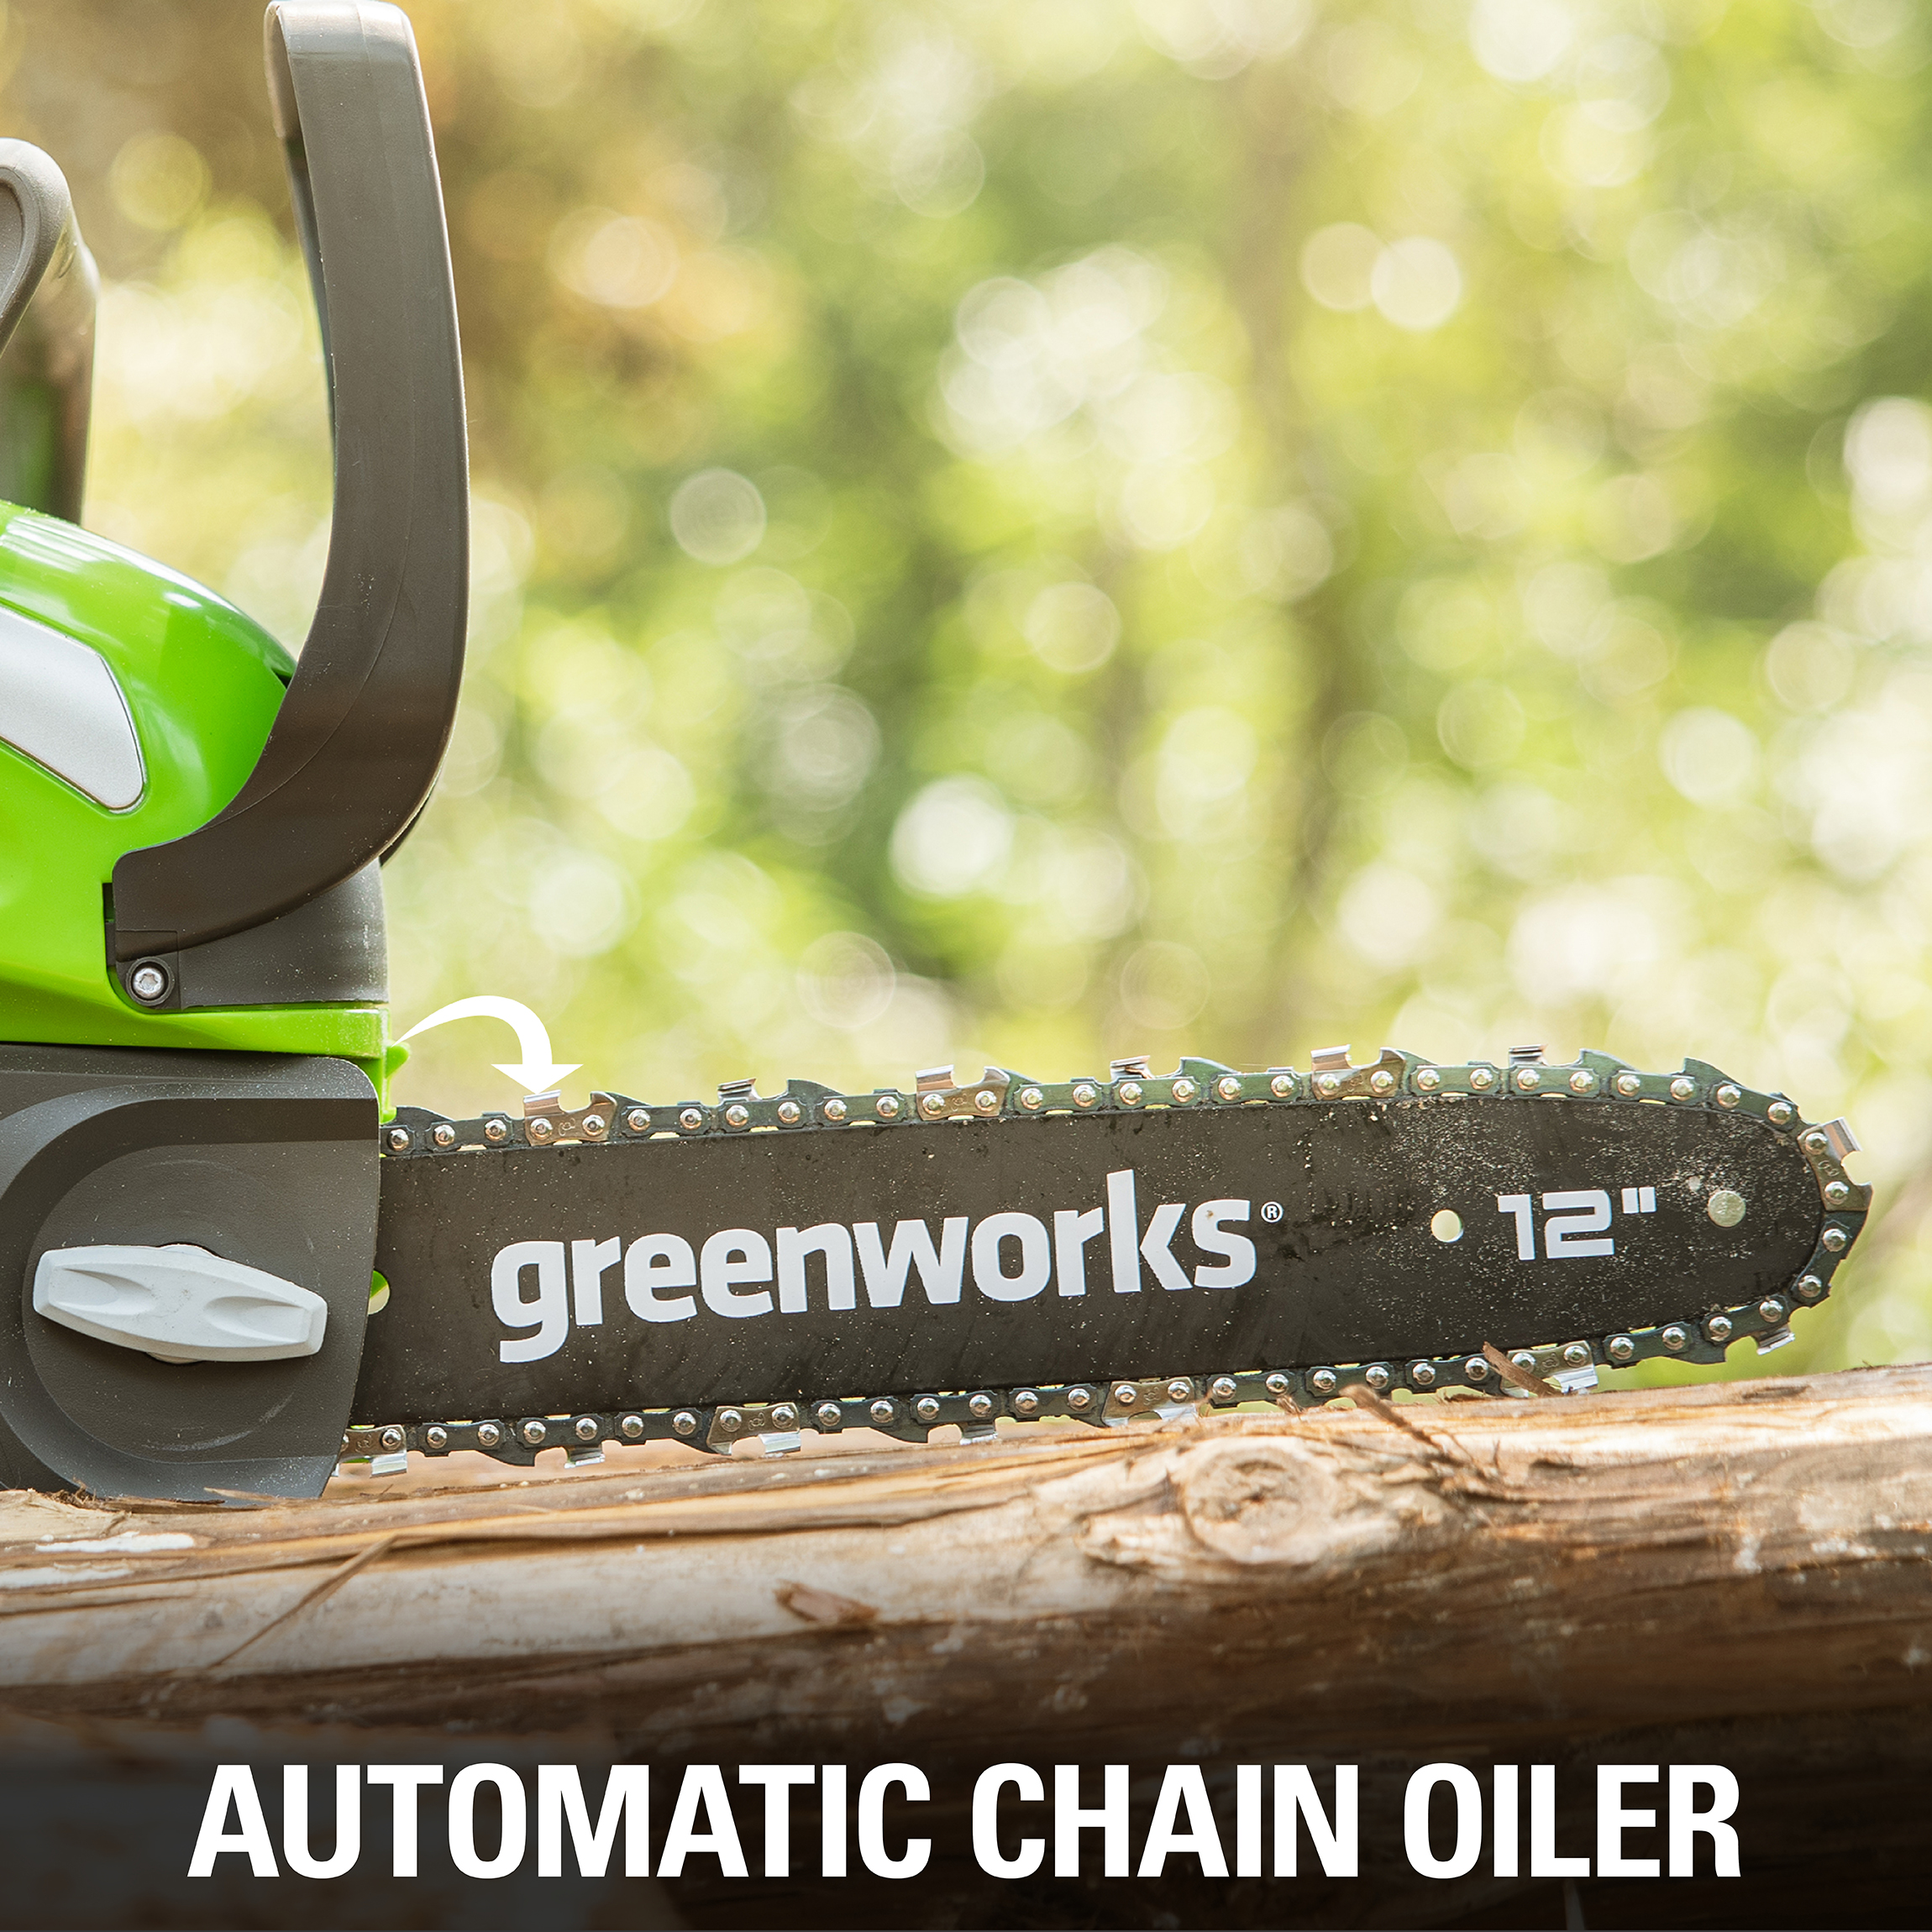 Greenworks 40V 12" Cordless Chainsaw with 2.0 Ah Battery & Charger, 20262 - image 10 of 14